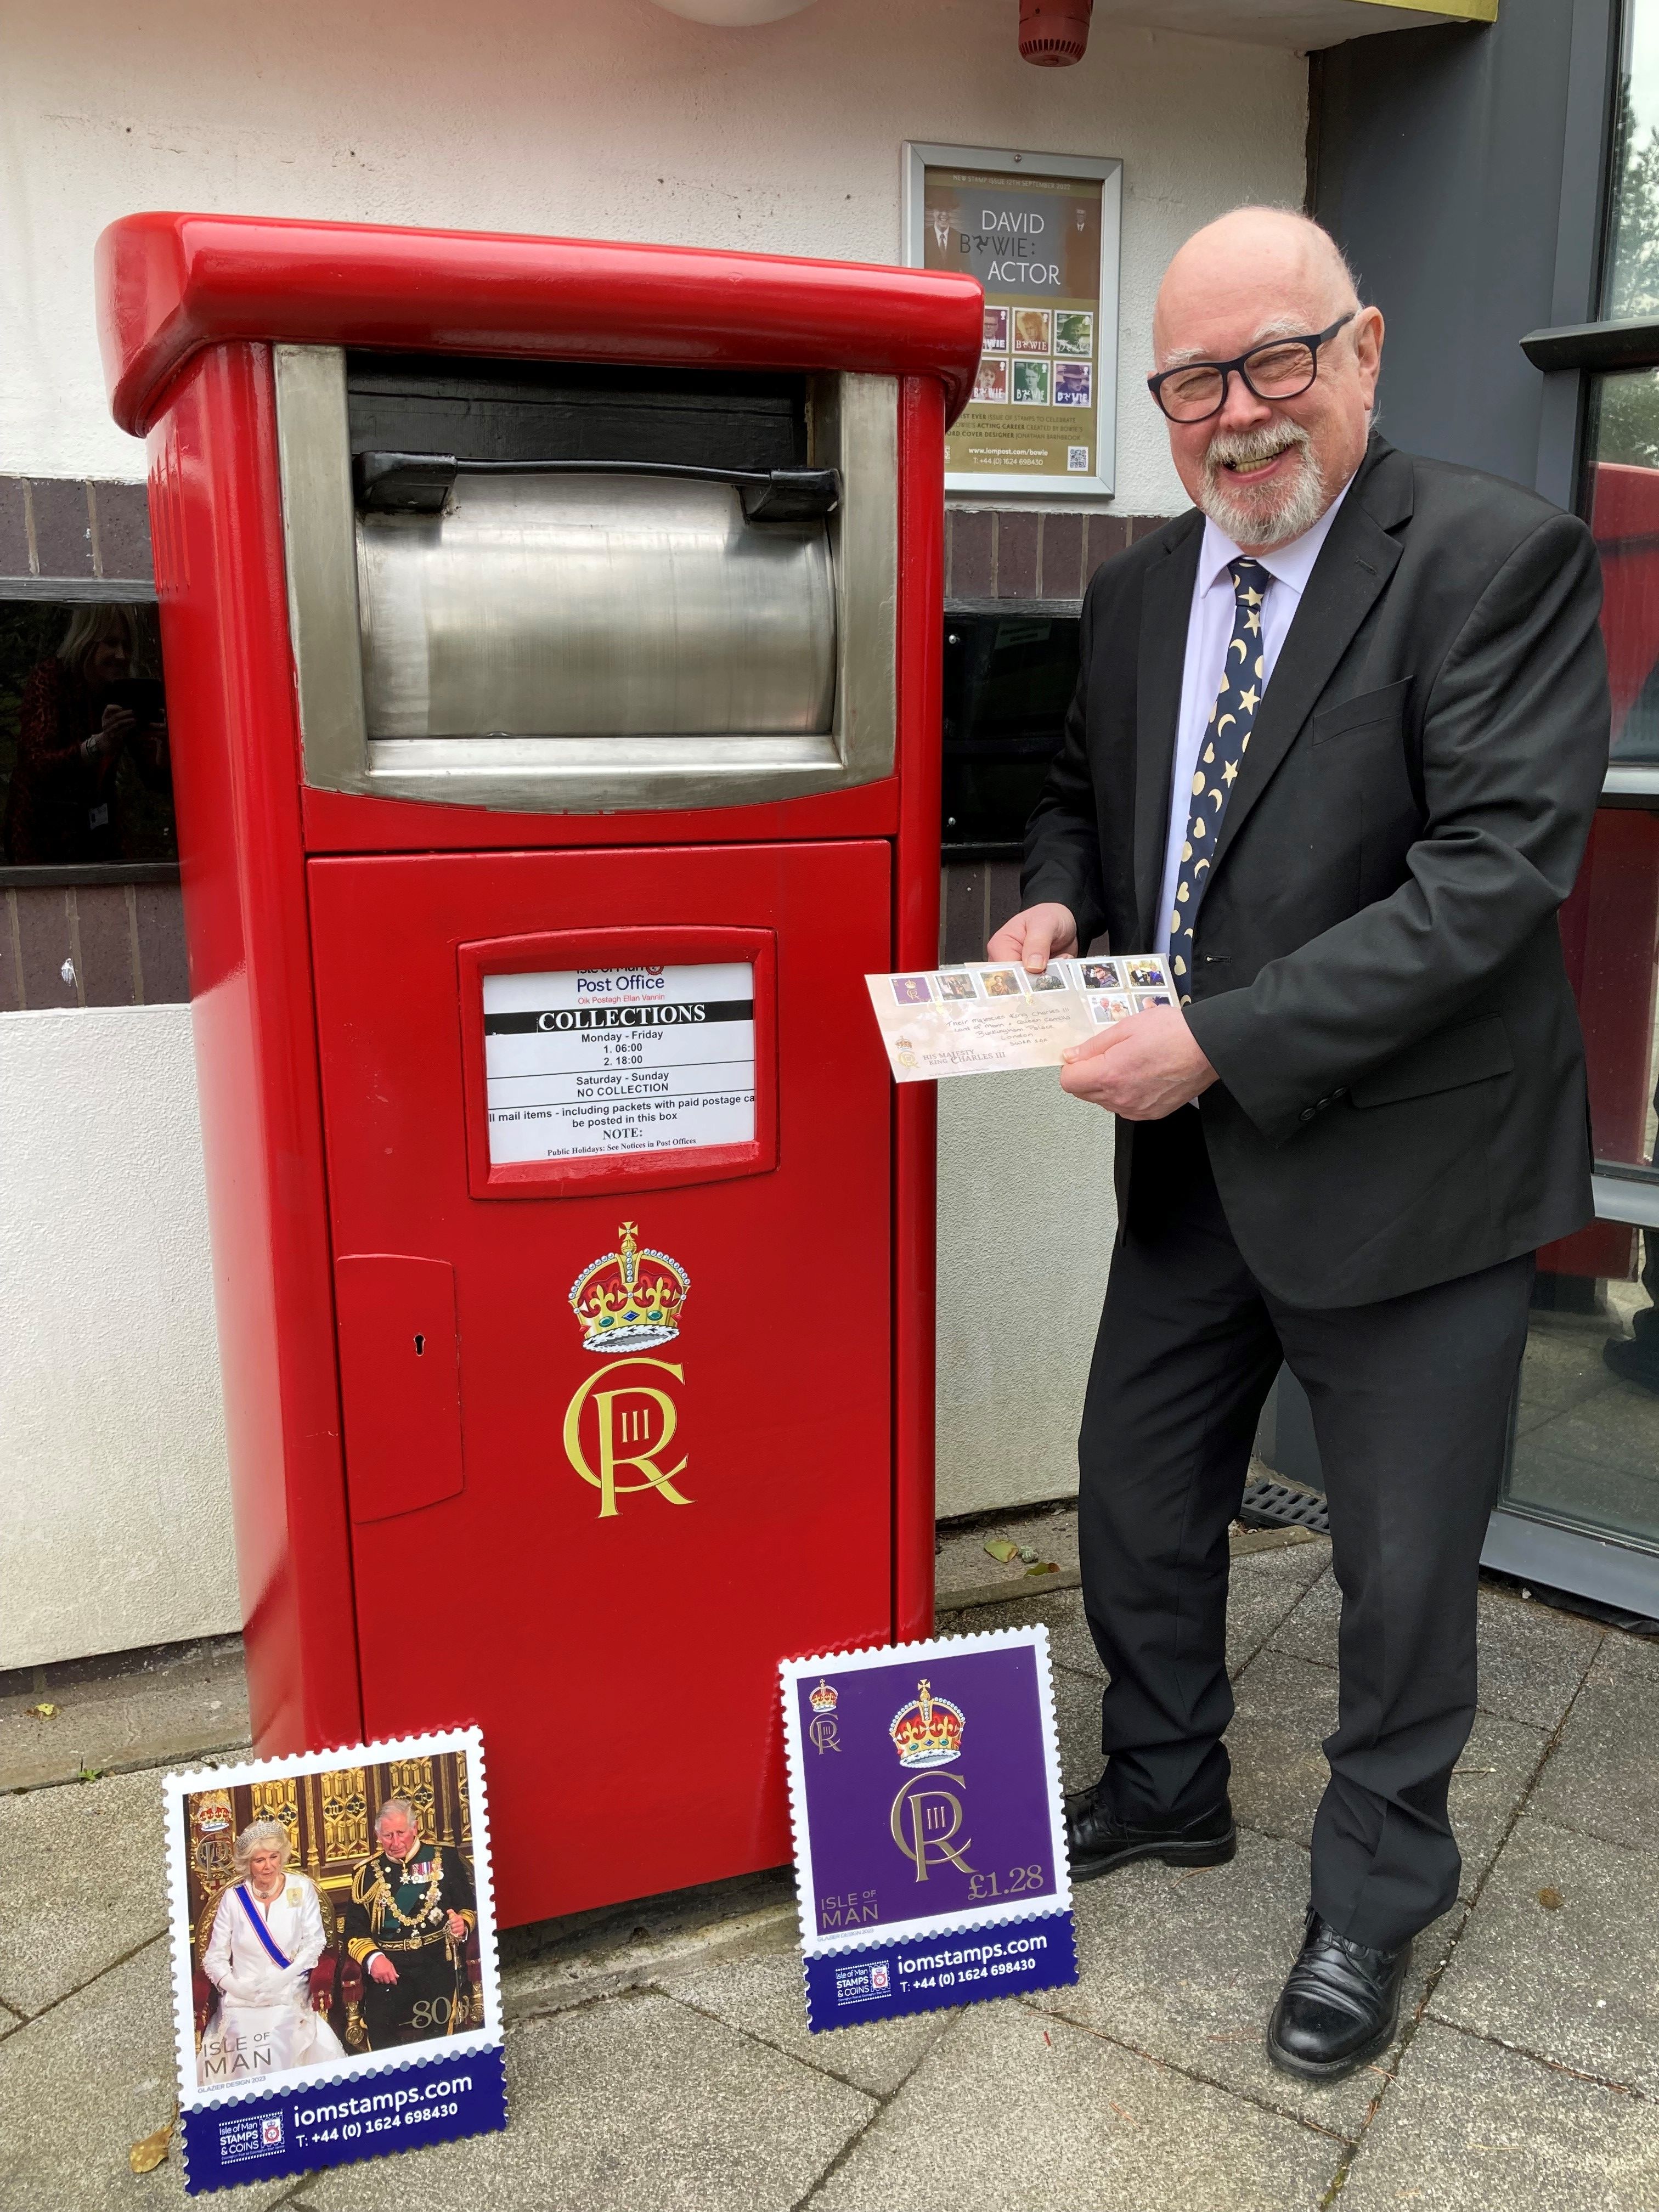 The first ‘CRIII’ cypher was featured on a post box on the Isle of Man.